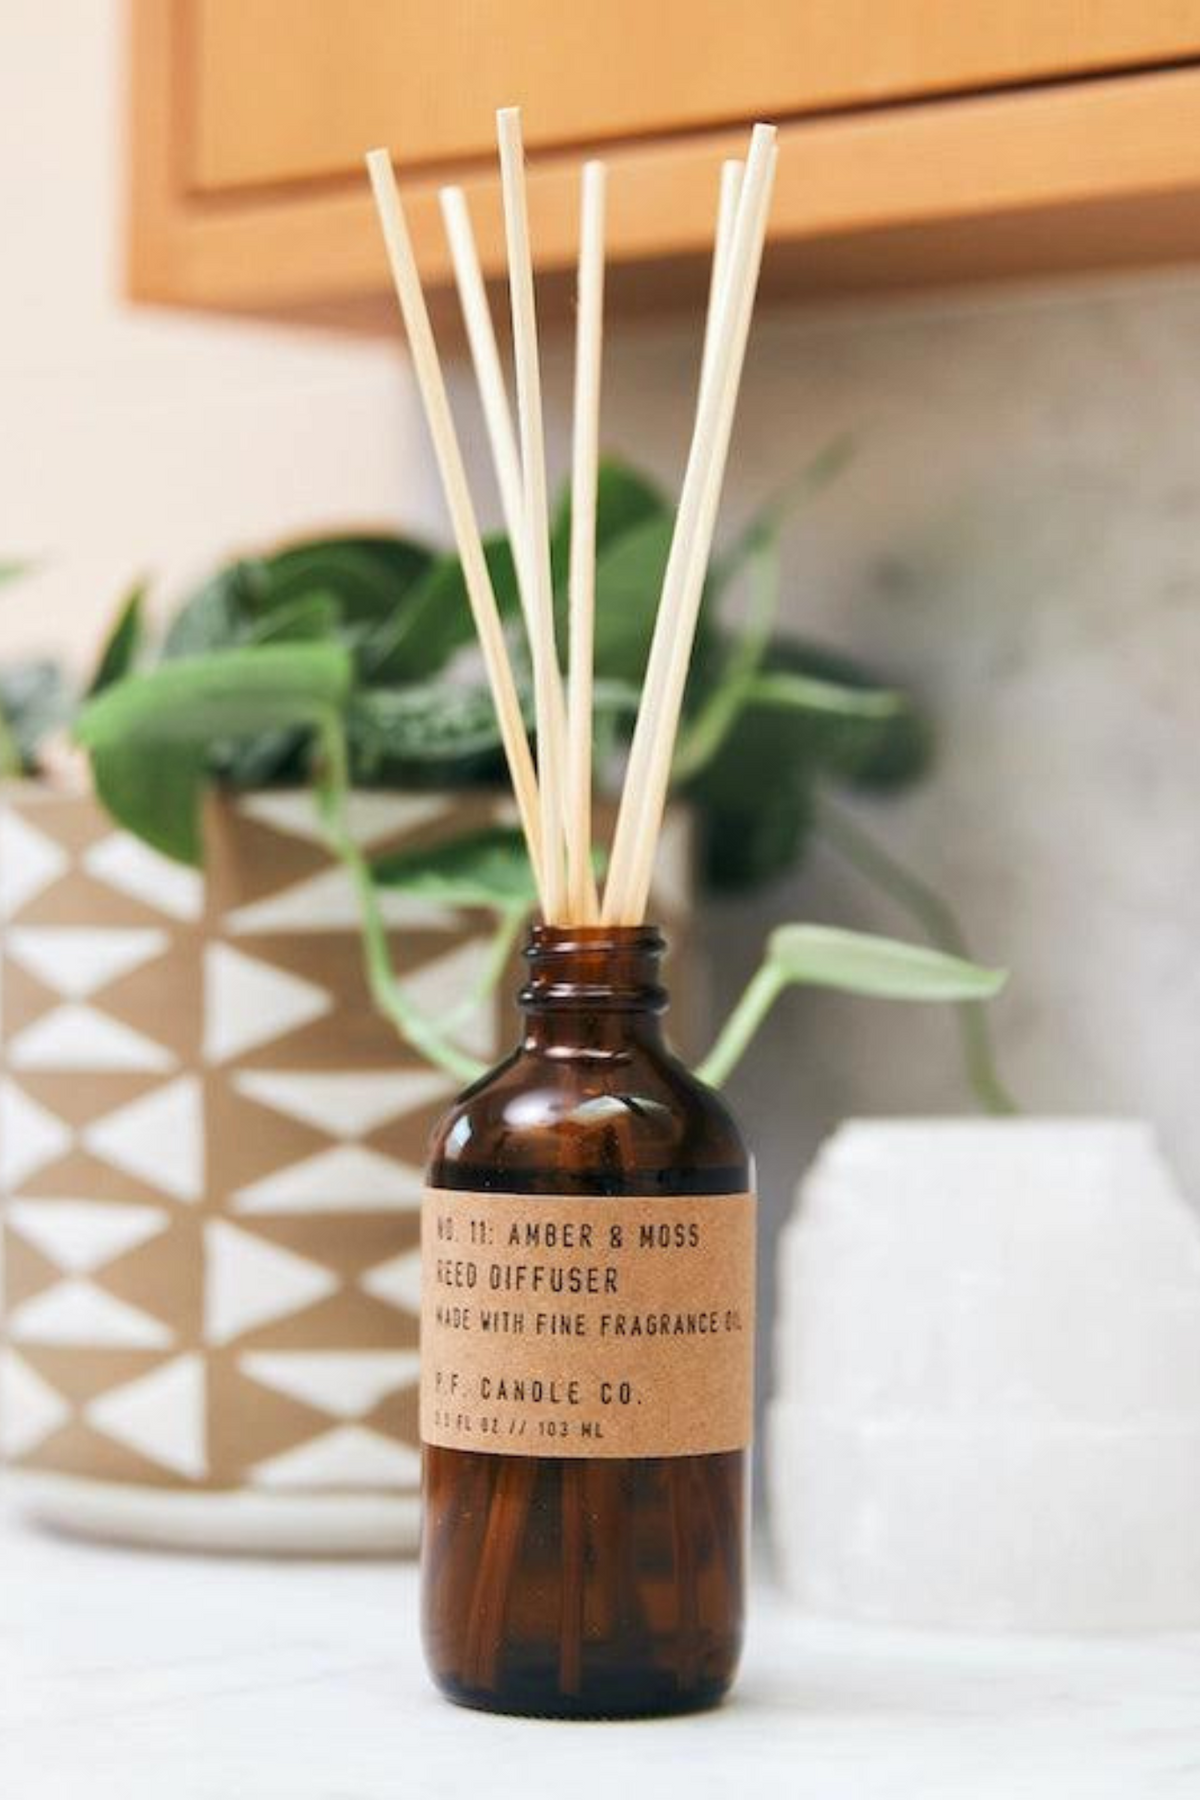 P.F. Candle Co. Amber &amp; Moss Reed Diffuser